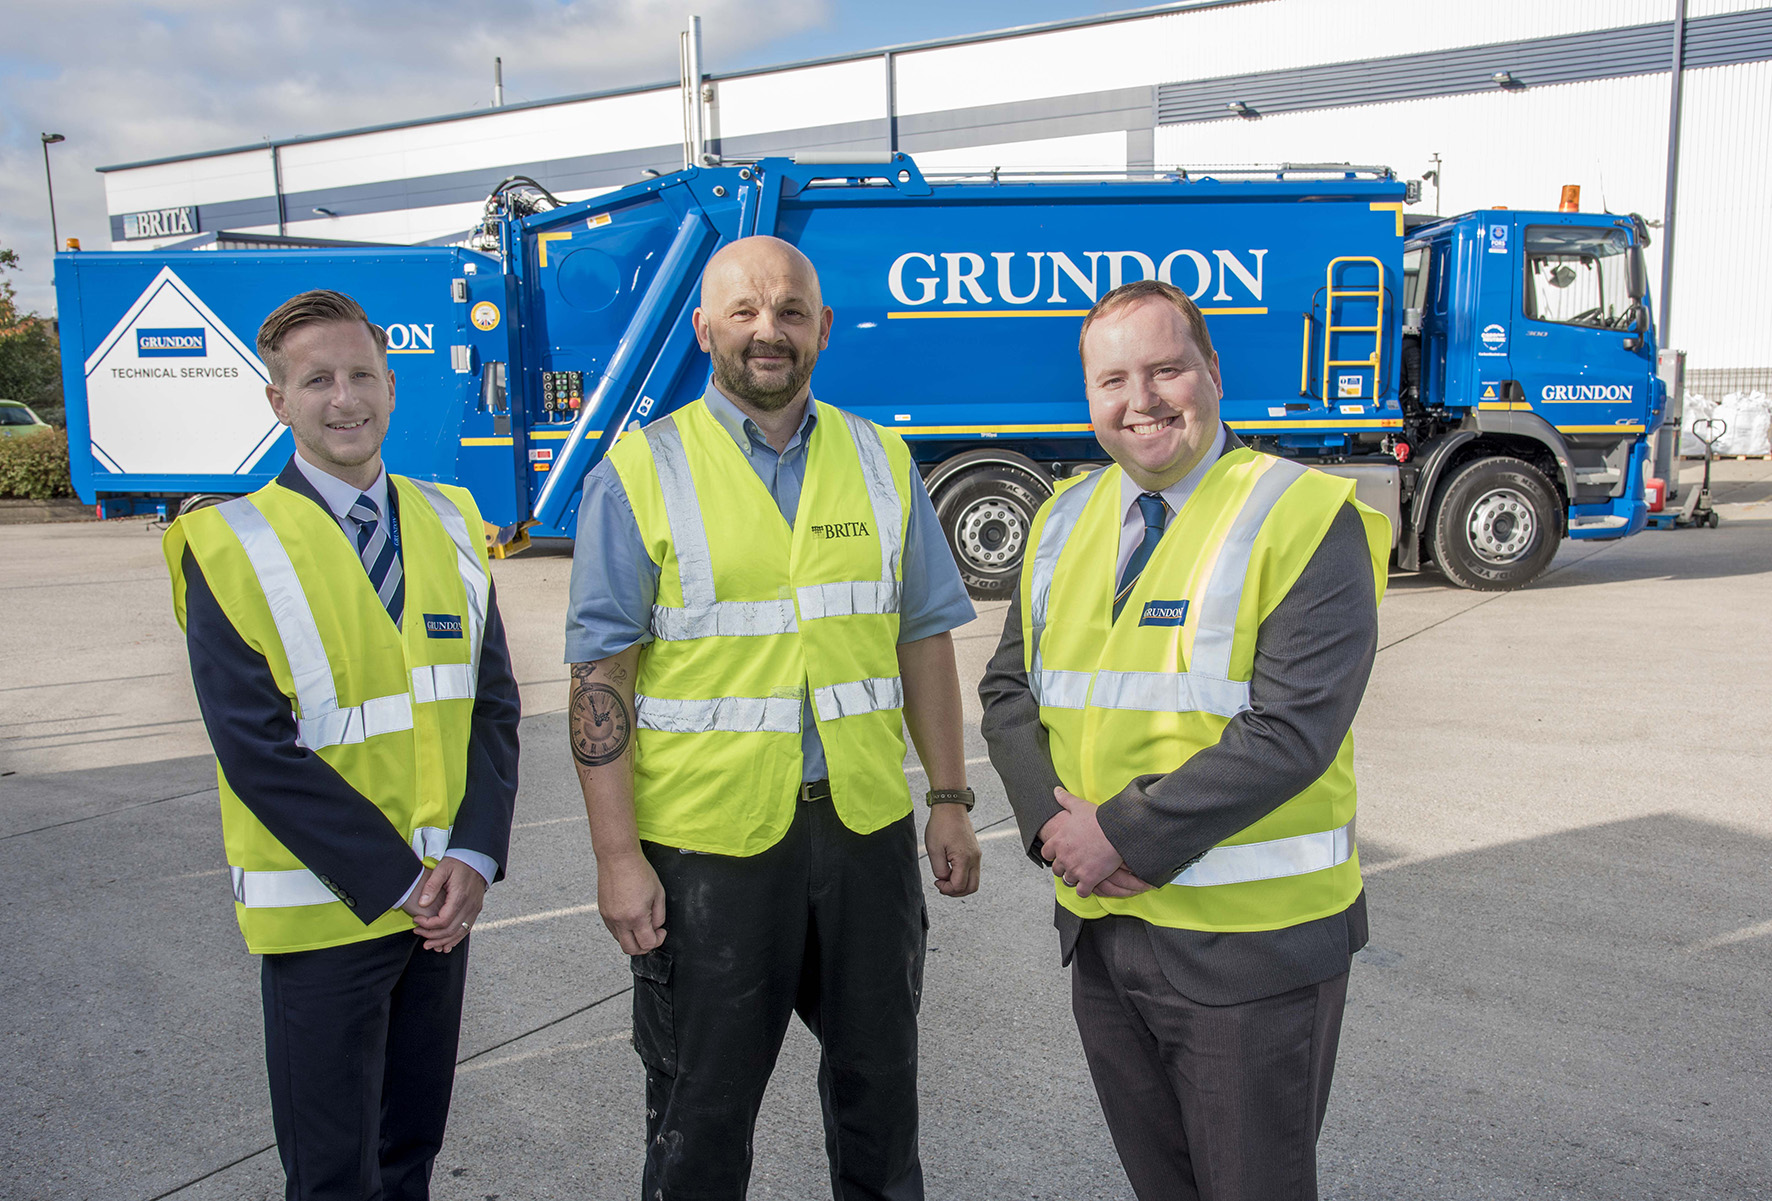 Celebrating a recycling success story: (from left to right) James Standen, Senior Sales Representative, Grundon; Bryan Edwards, Professional & Services Warehouse Manager at BRITA; and Ollie Stoddart, Senior Technical Waste Sales Representative at Grundon